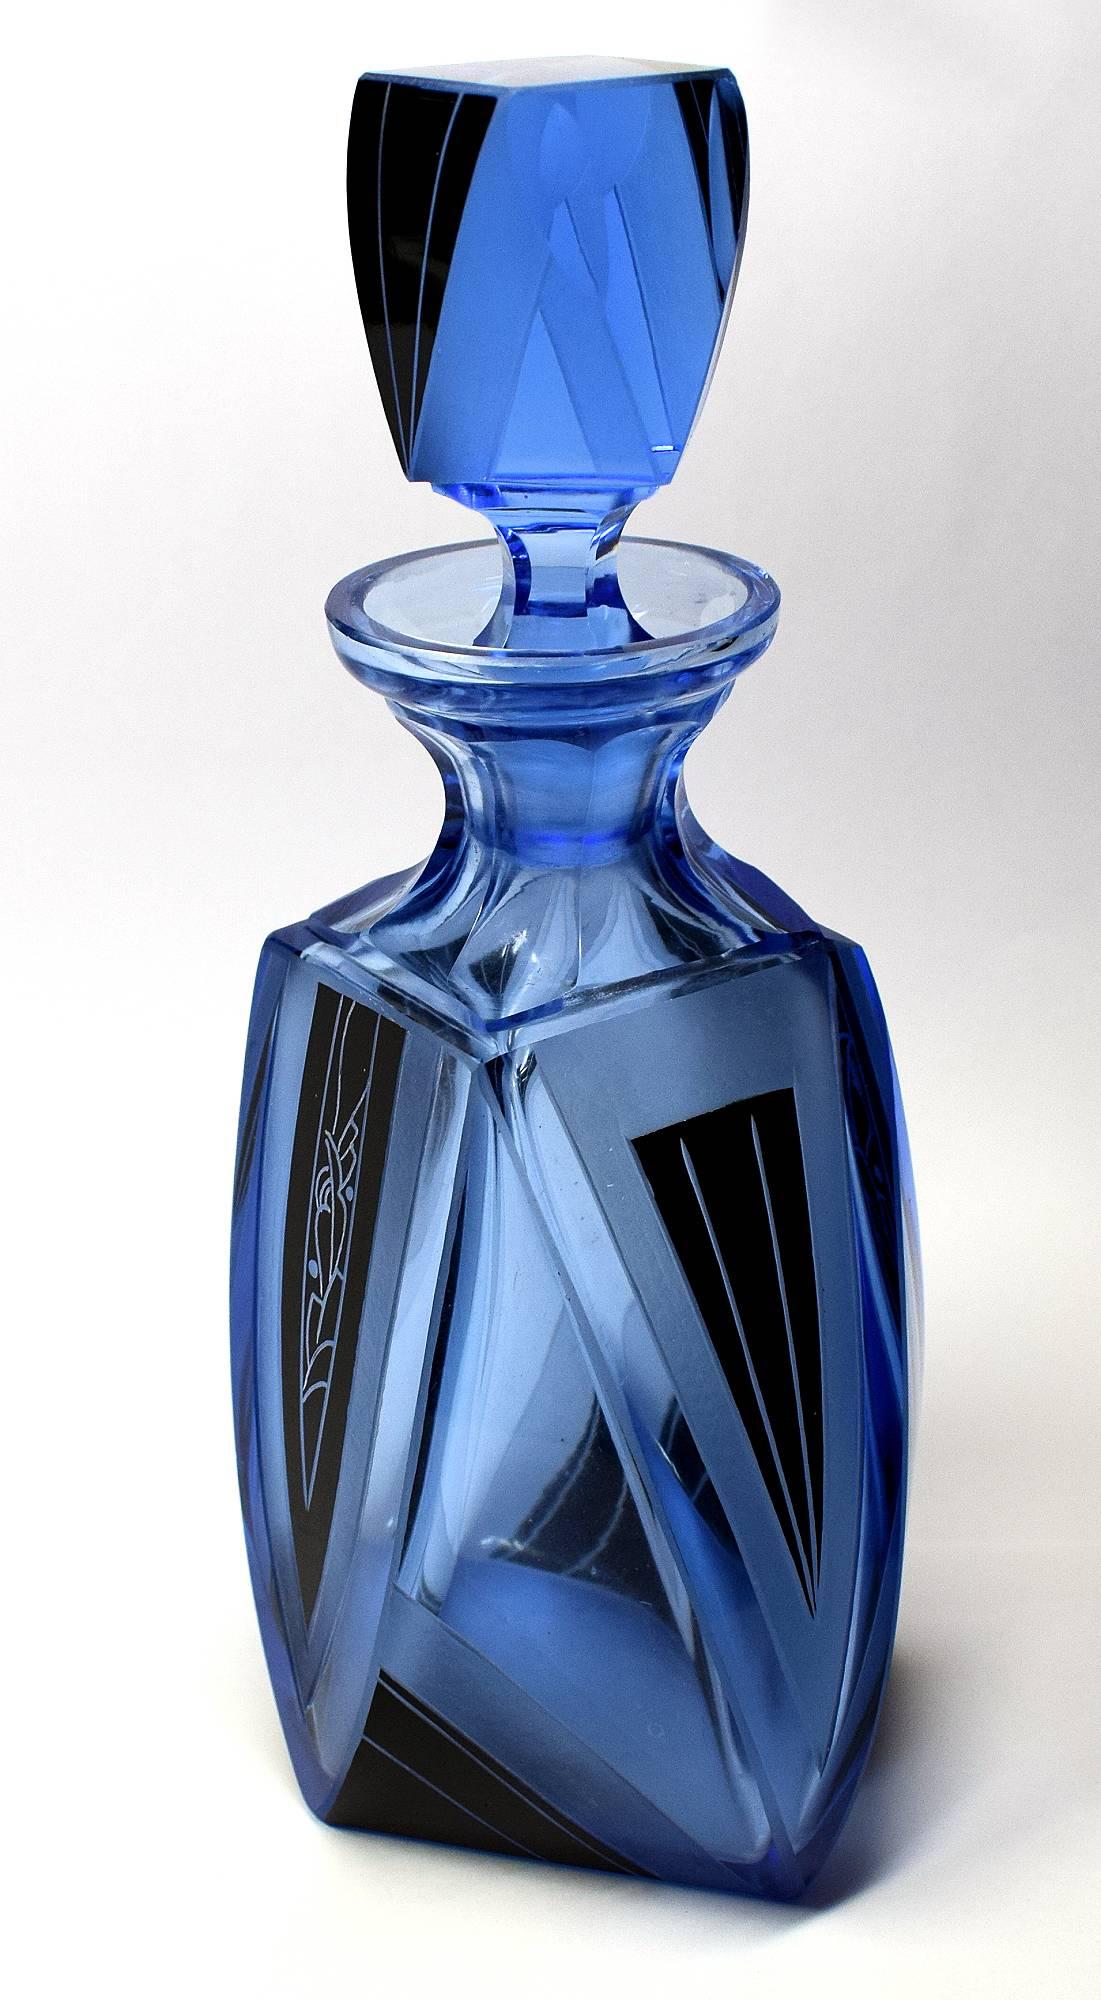 Very high quality, and collectible Art Deco Czech glass decanter set in a rich blue with black enamel decoration. These classic sets are rare and a beautiful addition to any deco collection. No chips, damage, minimal signs of age. The set comprises